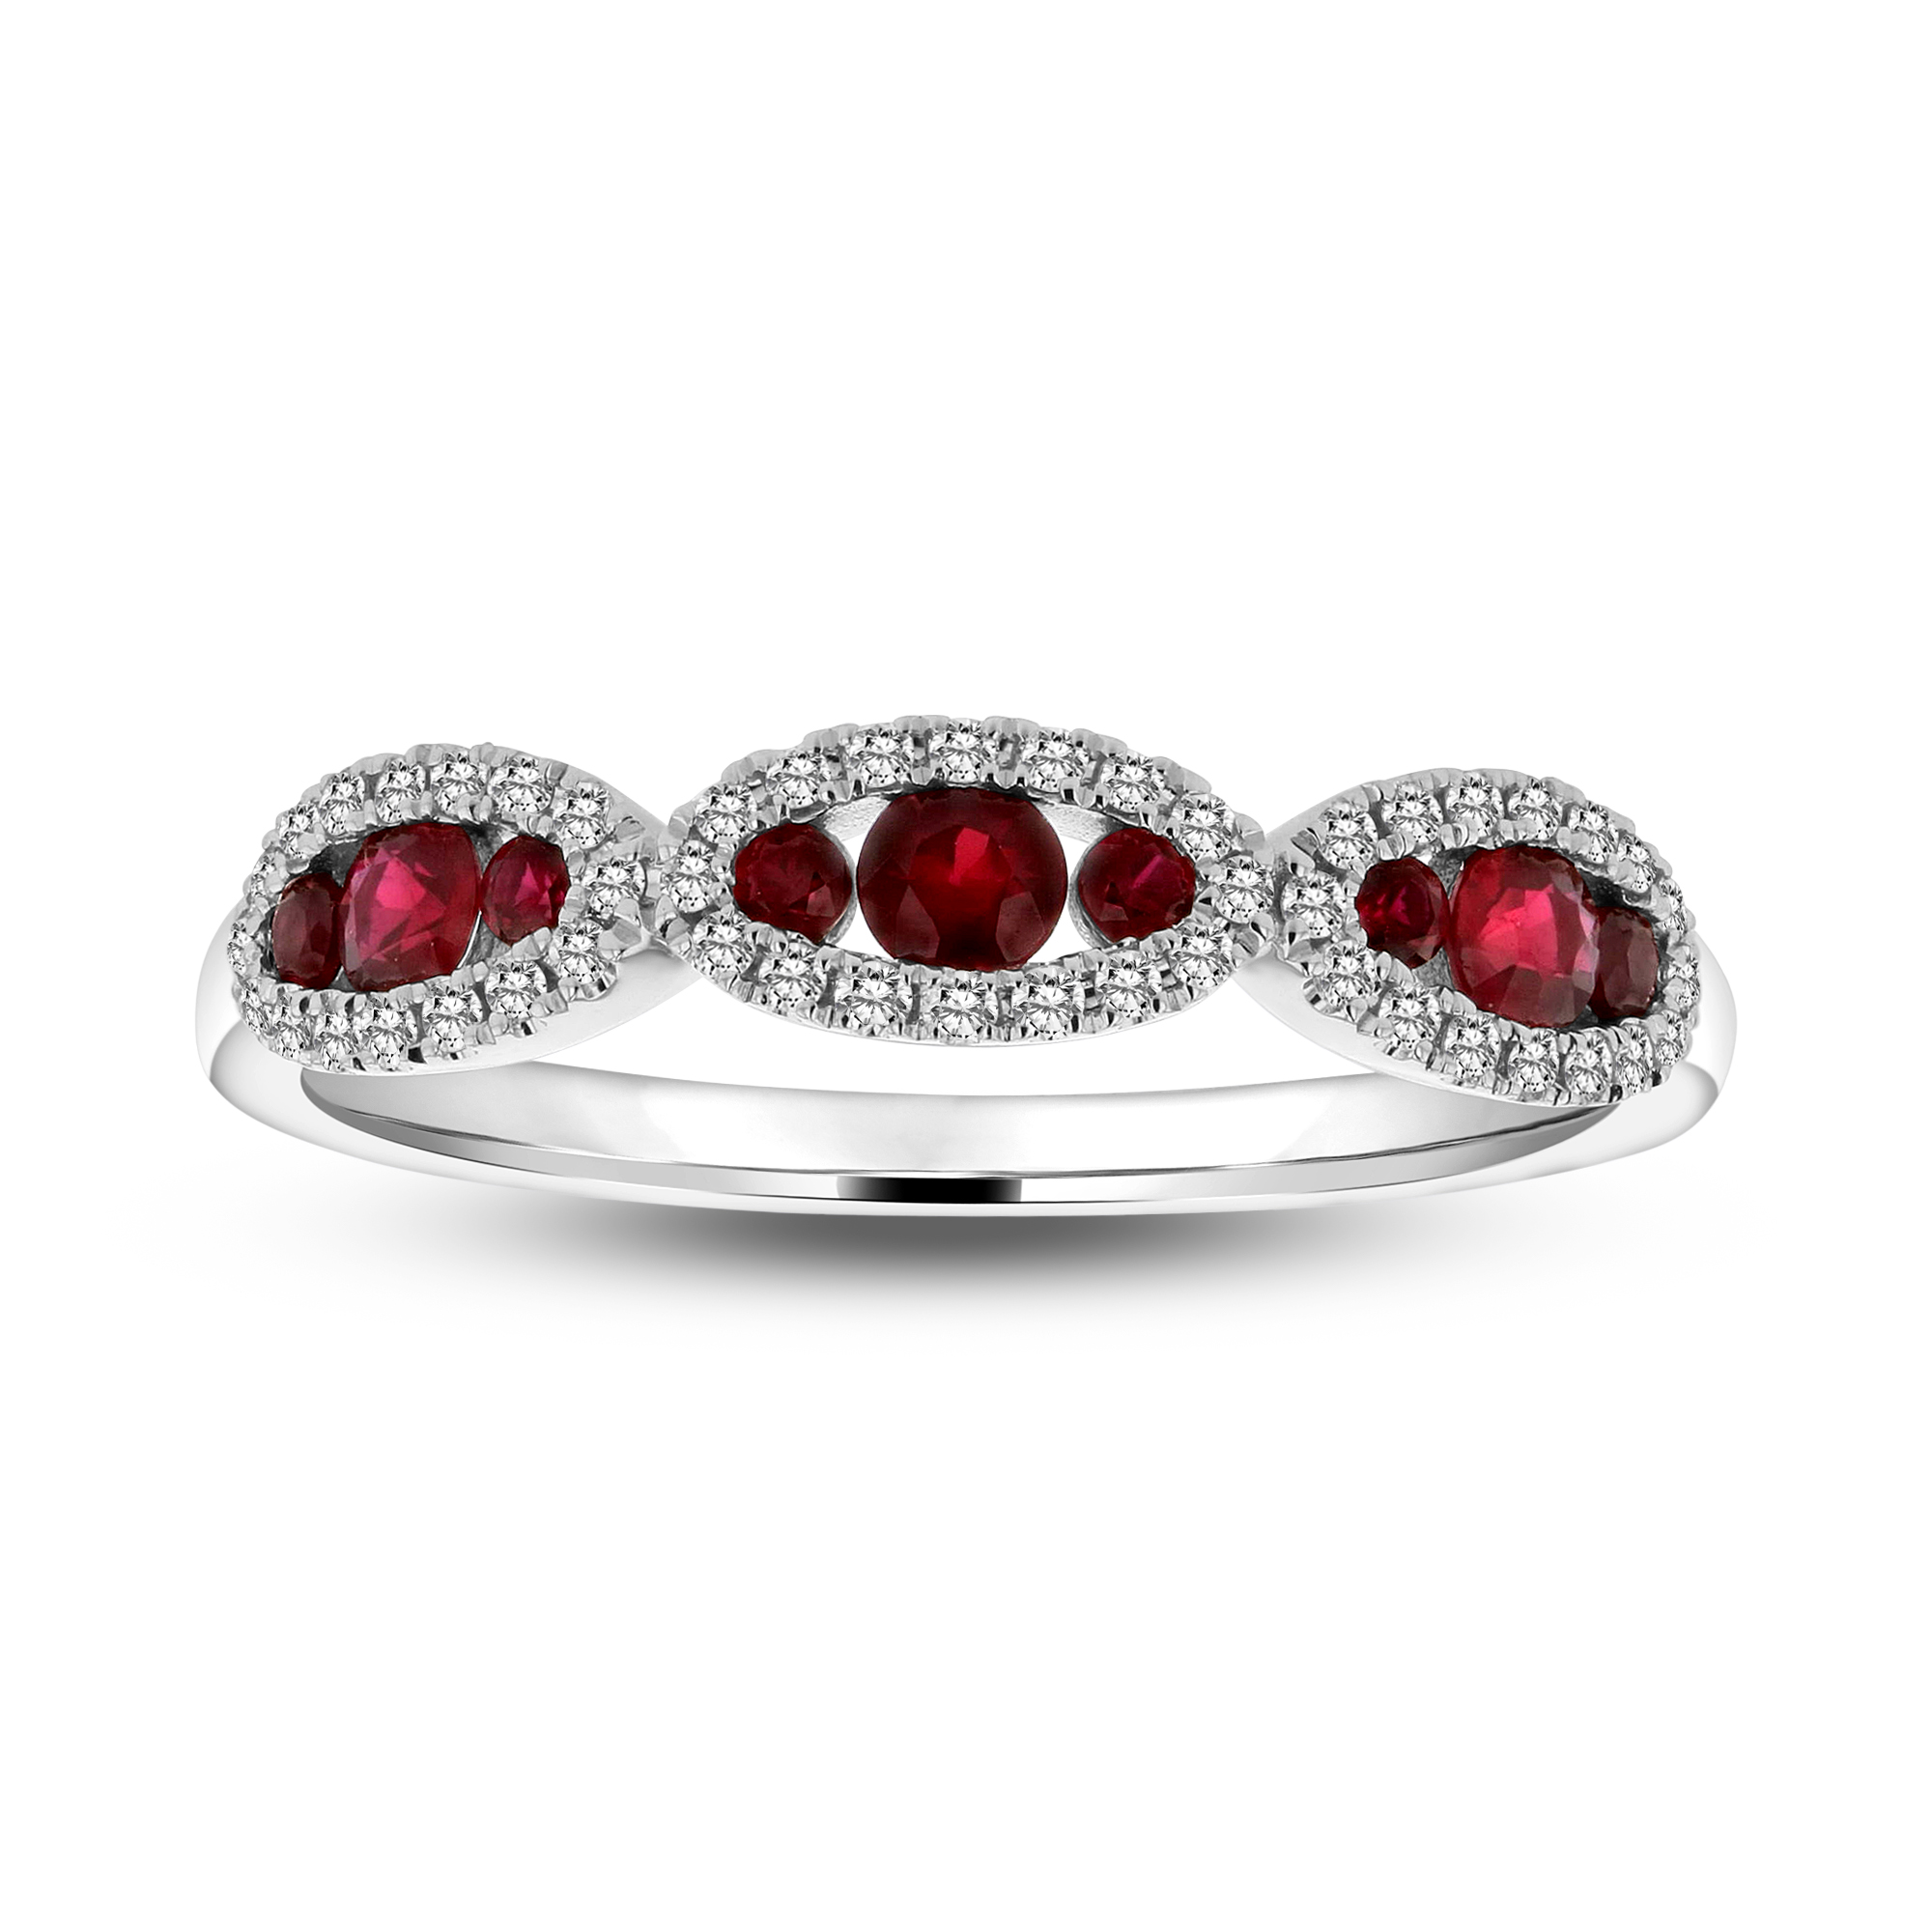 0.54ctw Diamond and Ruby Band in 14k White Gold